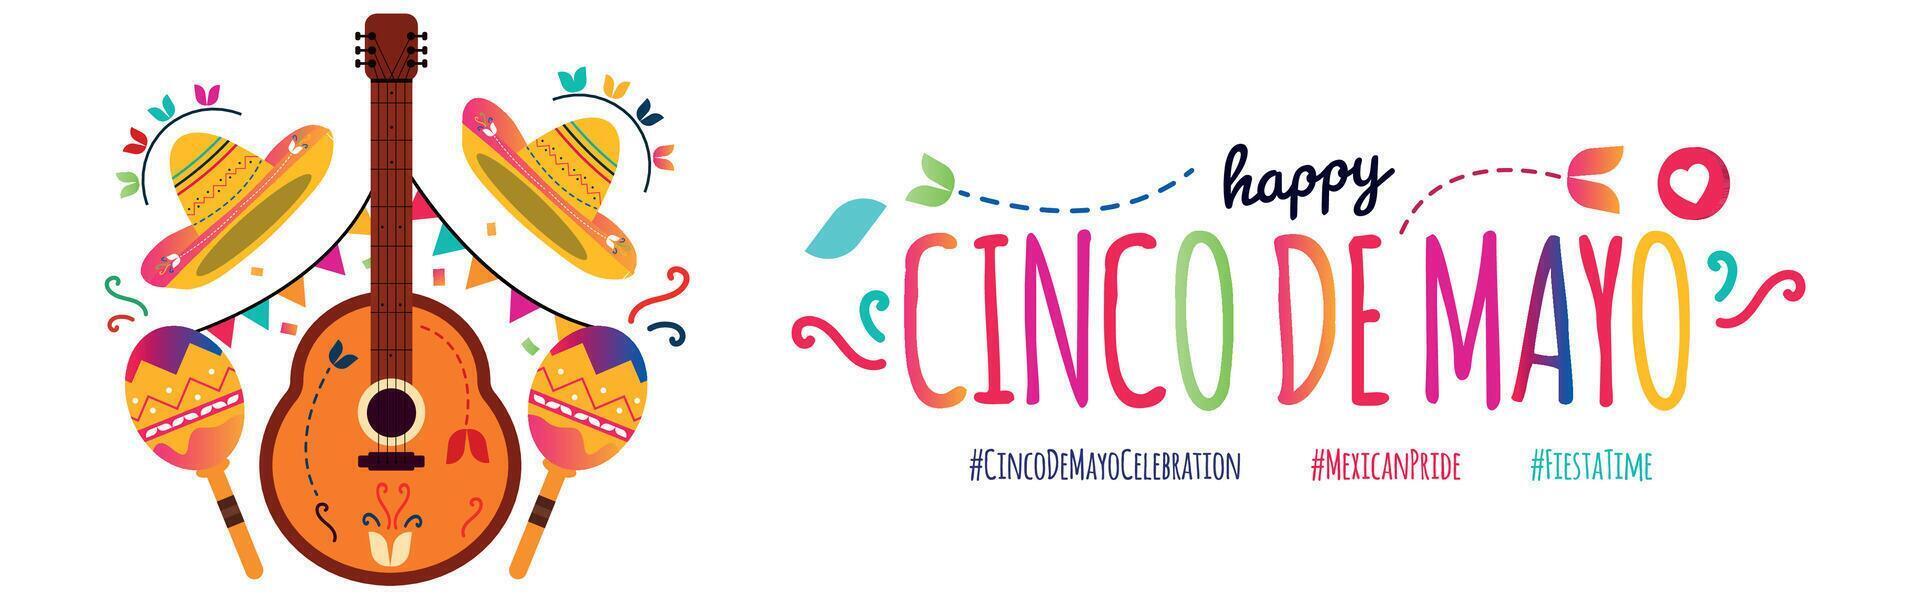 Cinco De Mayo. 5th May Happy Cinco de Mayo day, Mexican celebration cover banner with colourful text, Mexican guitar, maracas, hat on white background. Mexico Fiesta invitation card, banner, post. vector